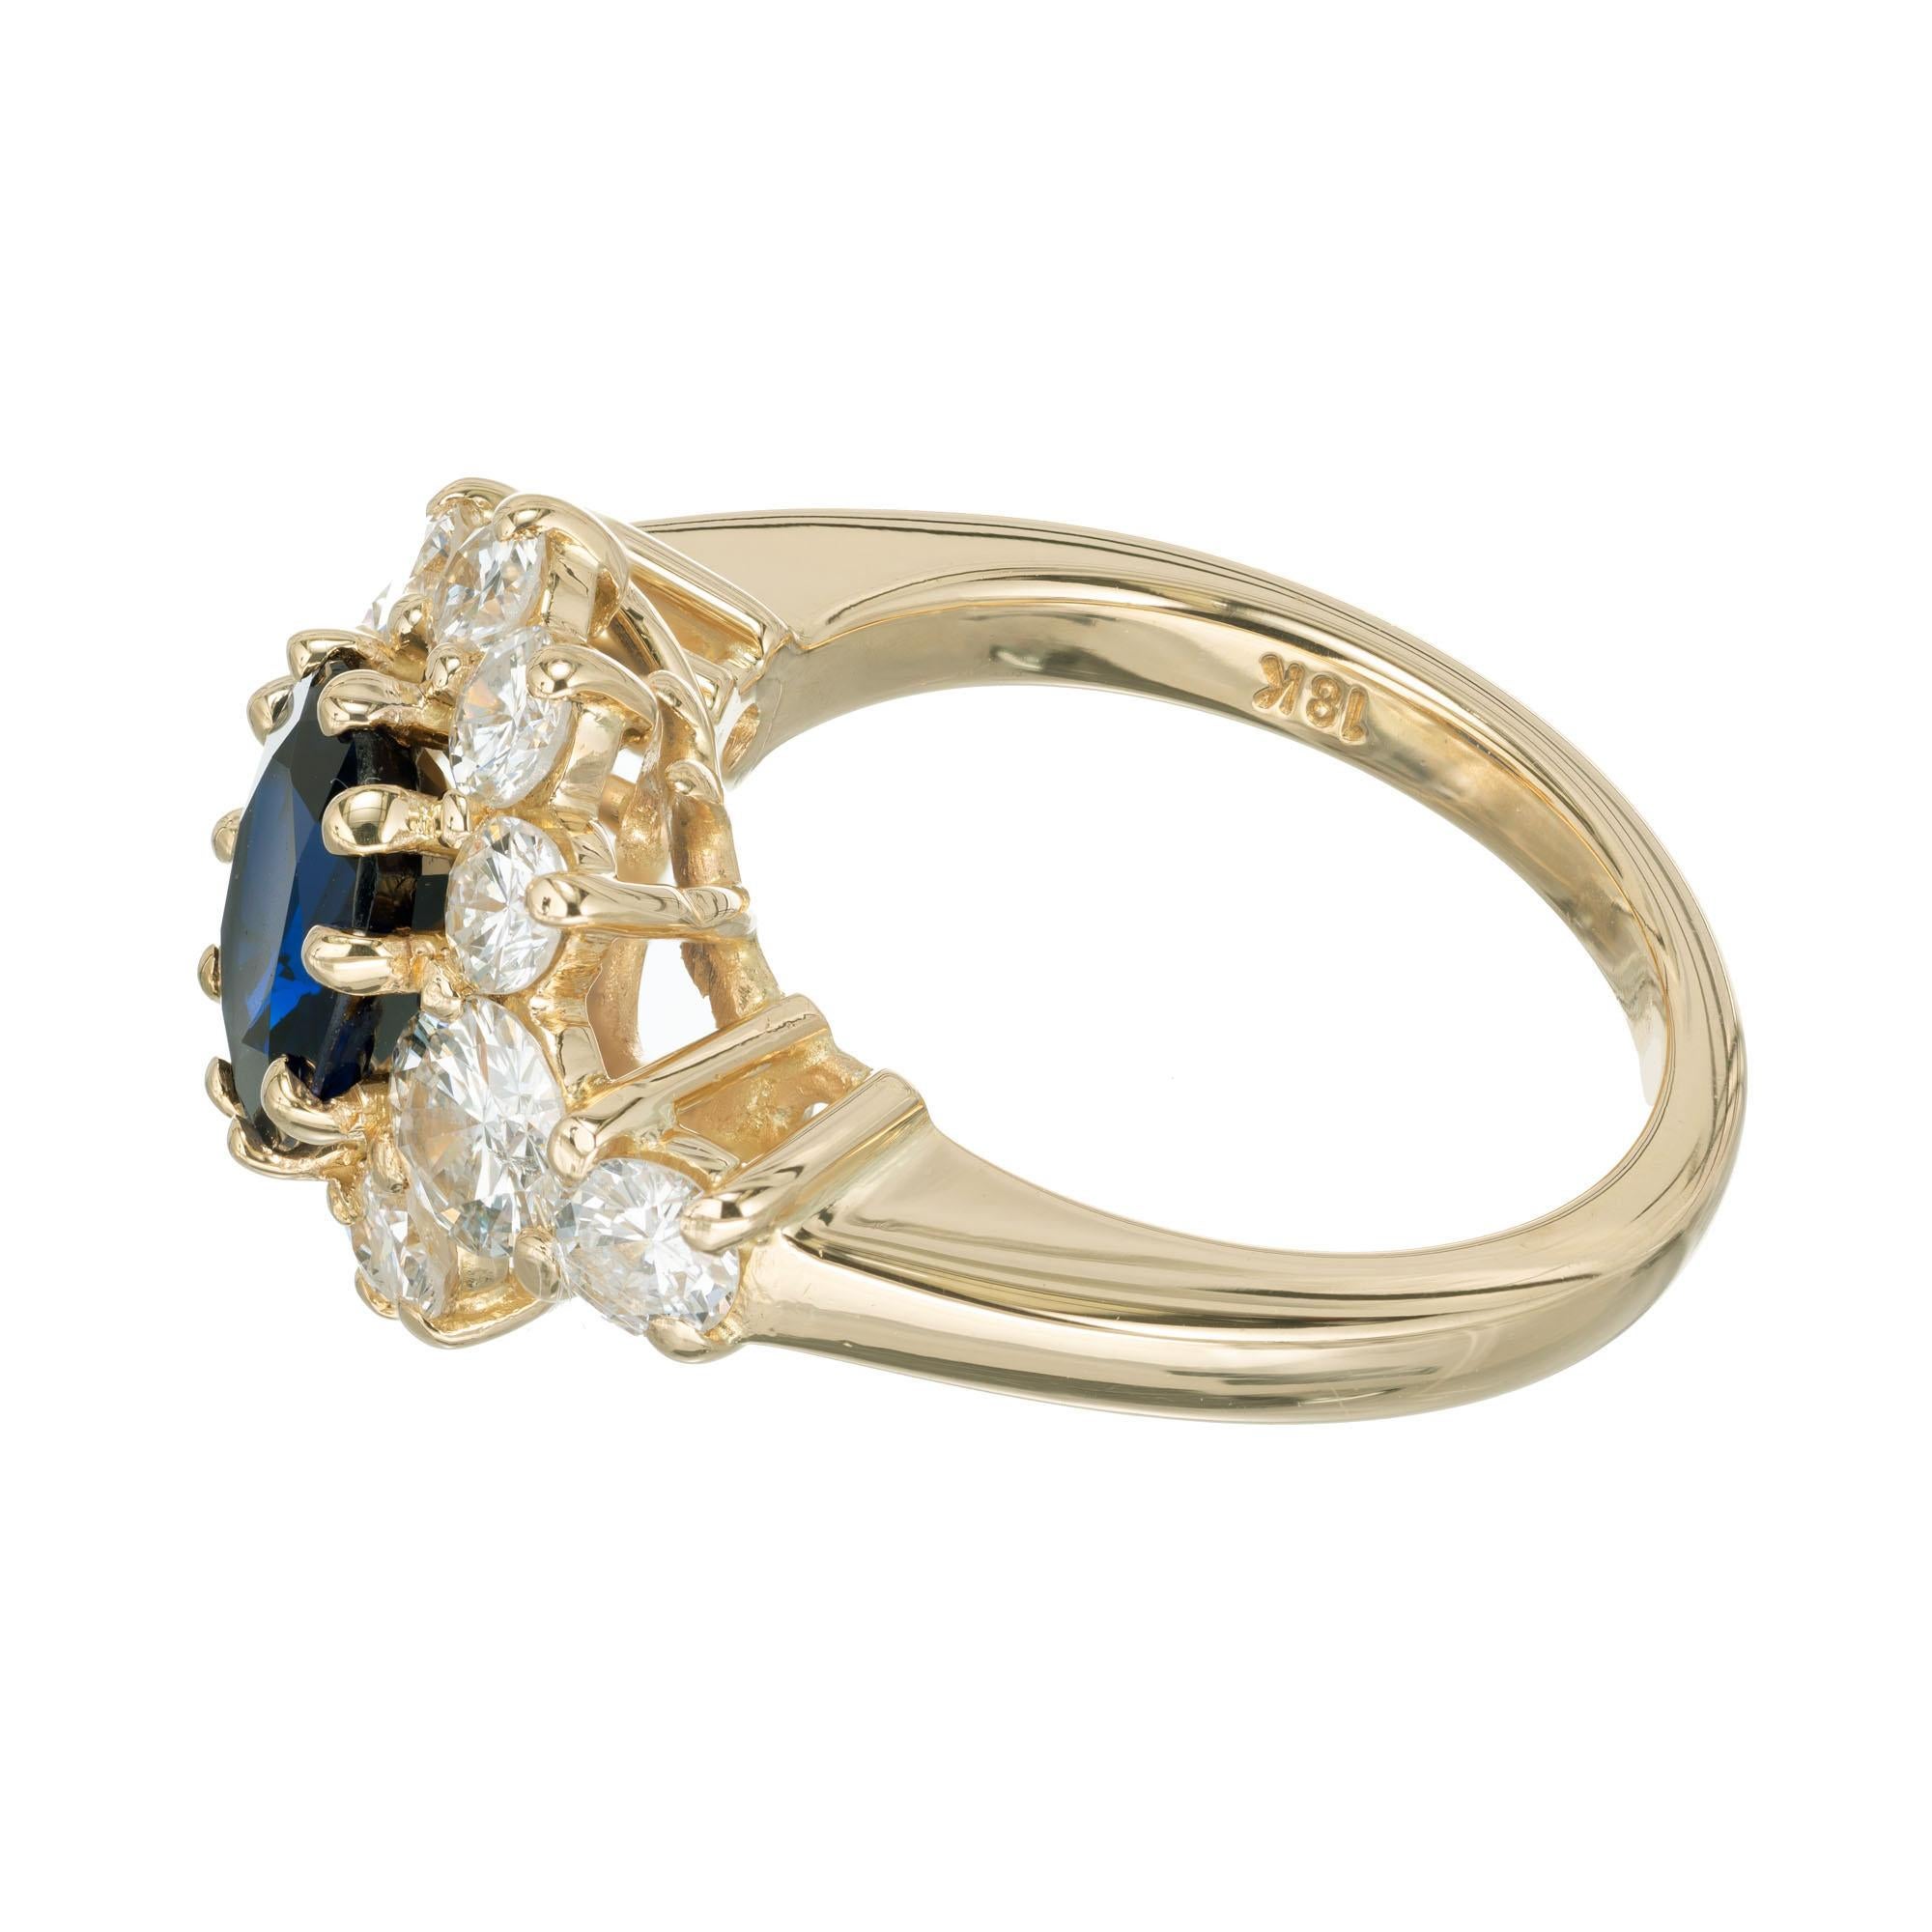 Oval Cut GIA Certified 1.69 Carat Blue Sapphire Diamond Yellow Gold Engagement Ring